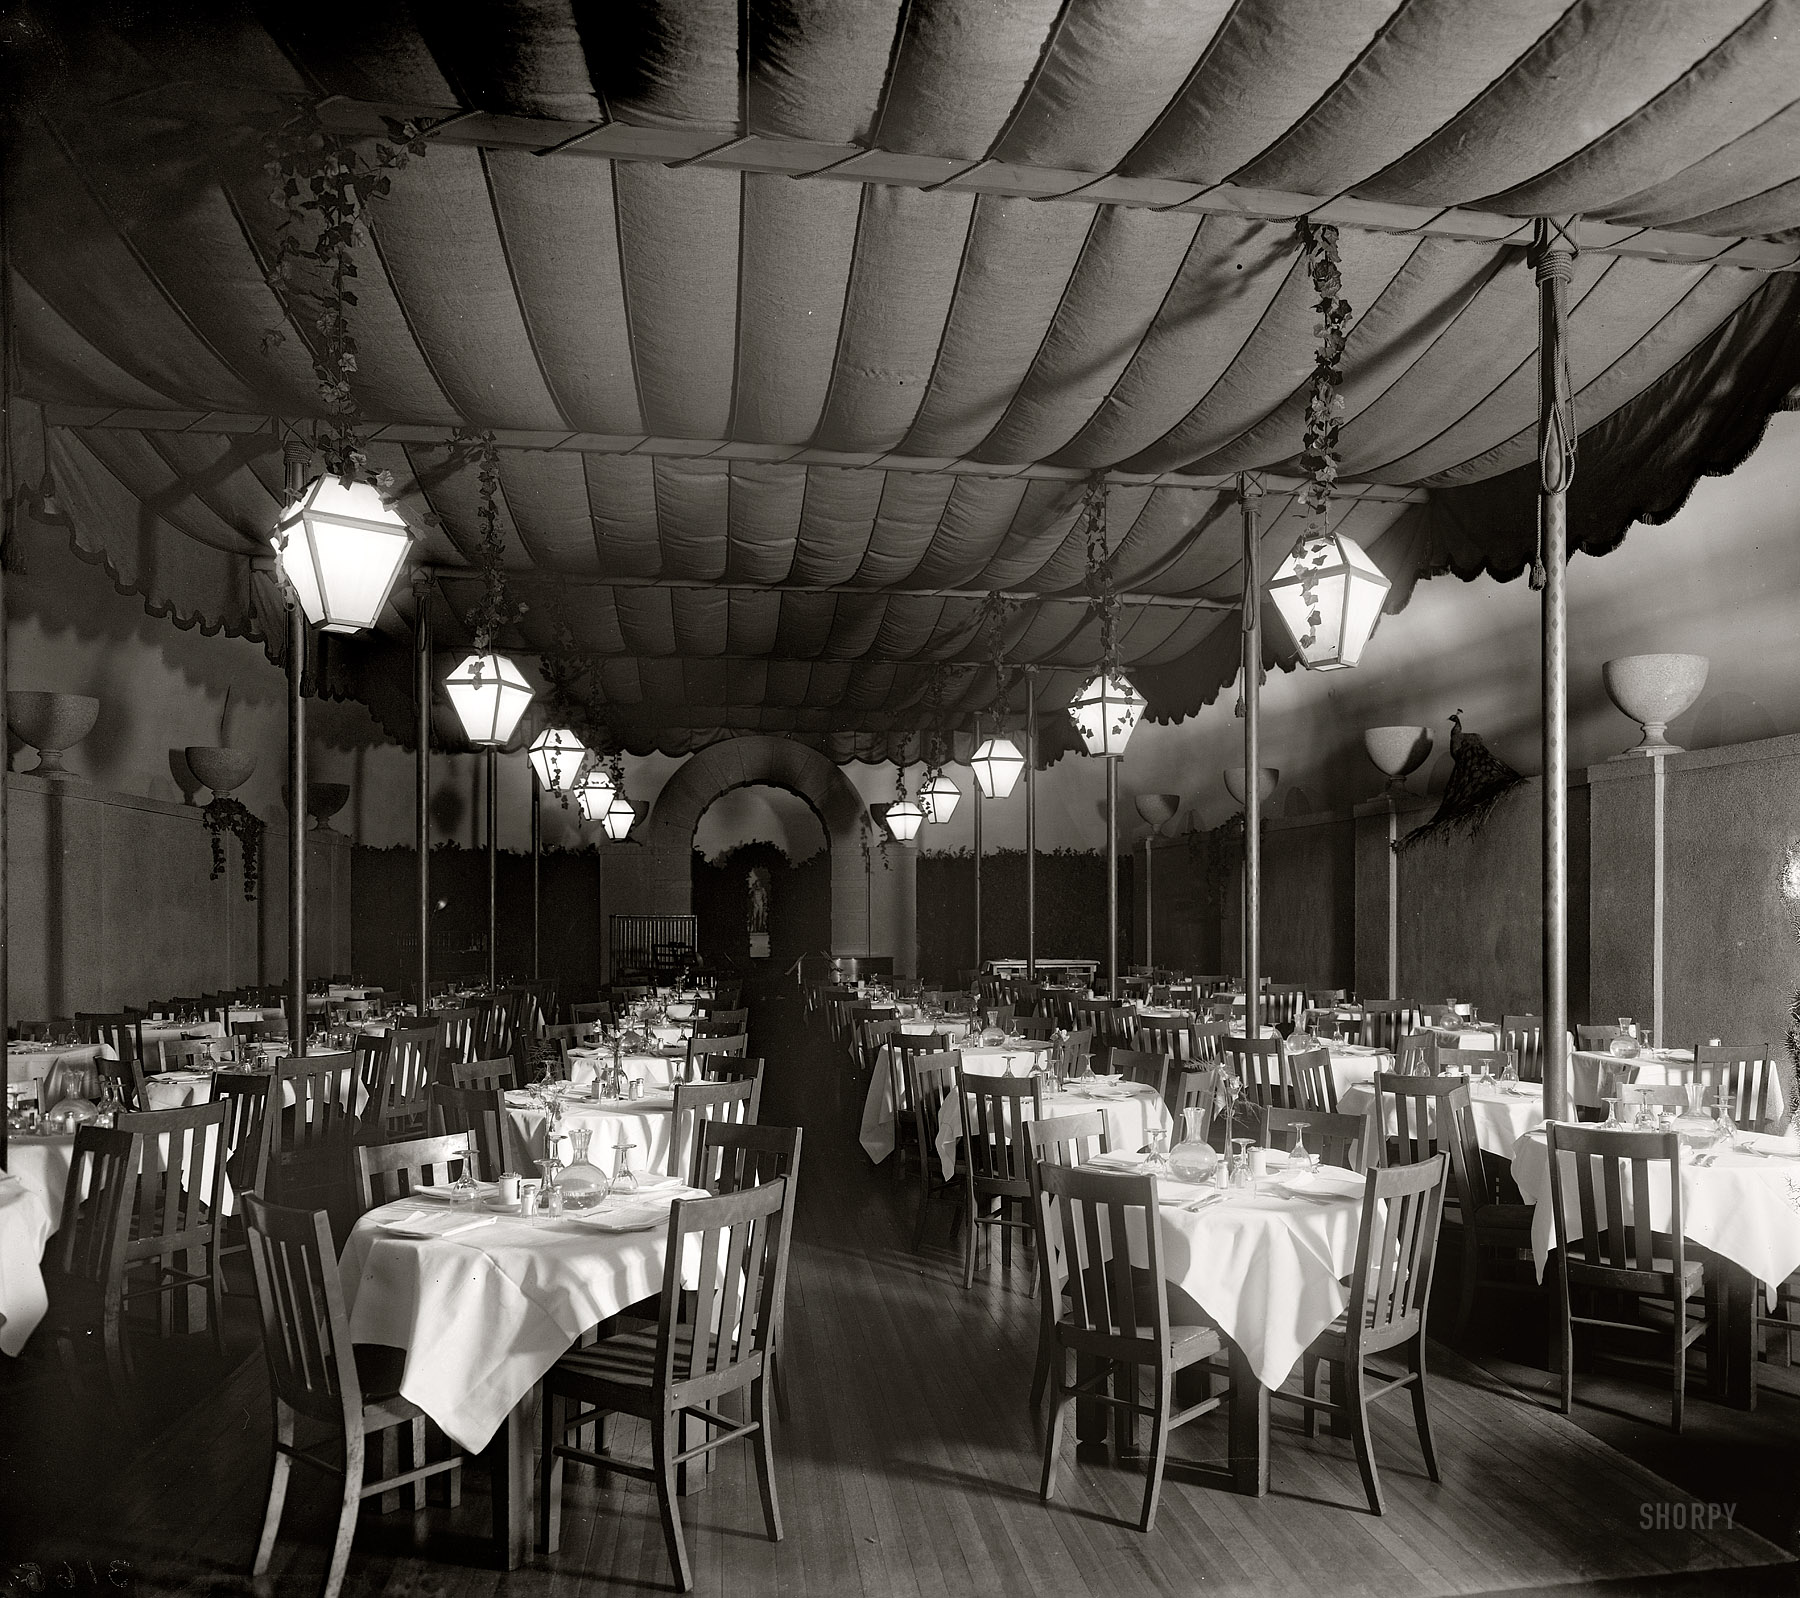 Washington, D.C., circa 1920. "Cafe St. Marks, Fifteenth Street." Special Grill Dinner, two dollars. Harris & Ewing Collection glass negative. View full size.